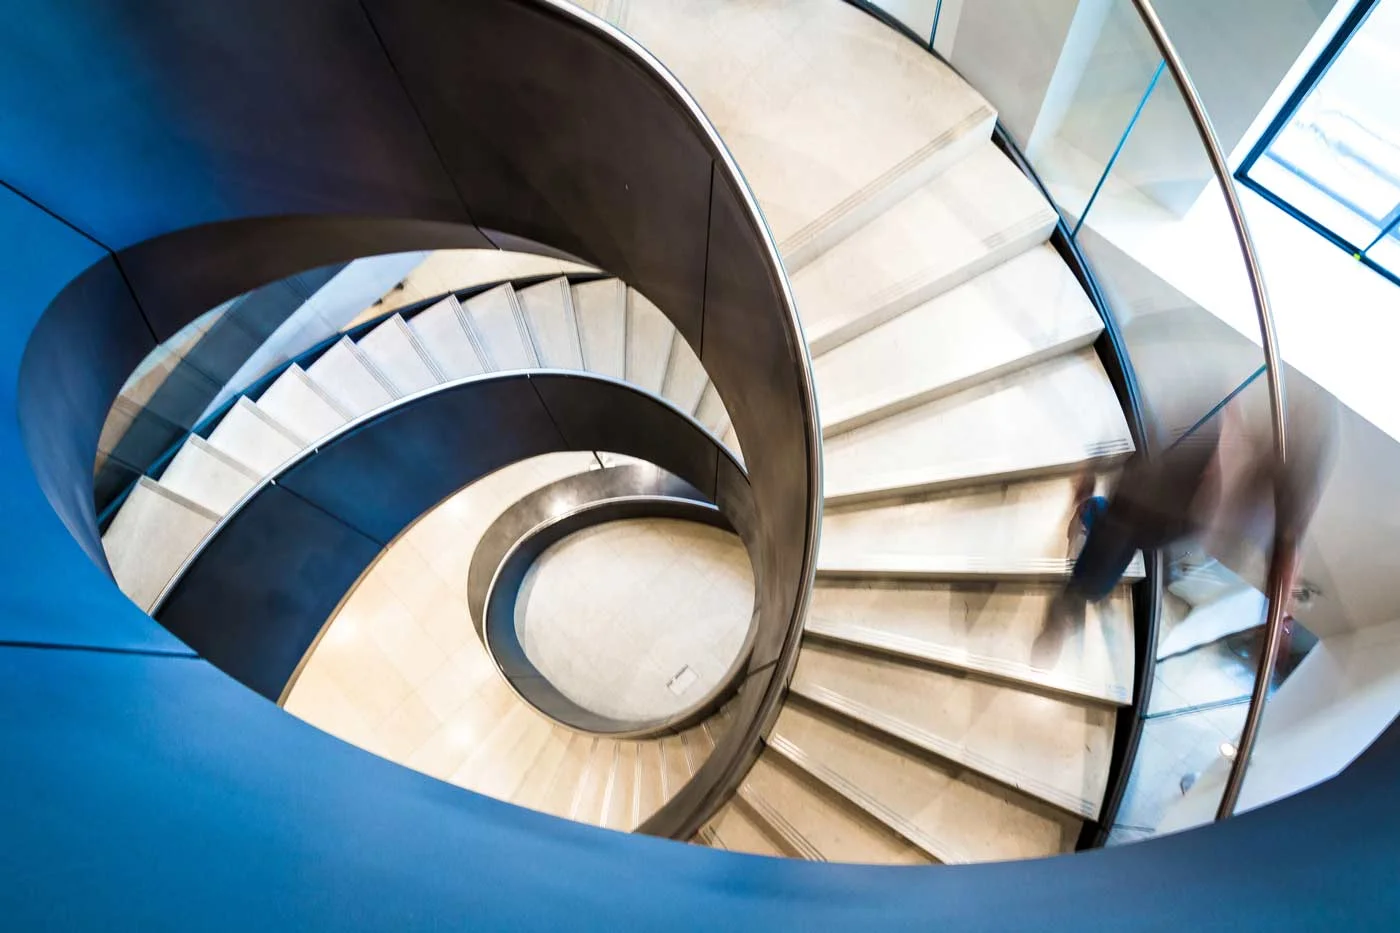 A person walks down a modern, spiral staircase with metallic railings and polished steps in a well-lit indoor setting.